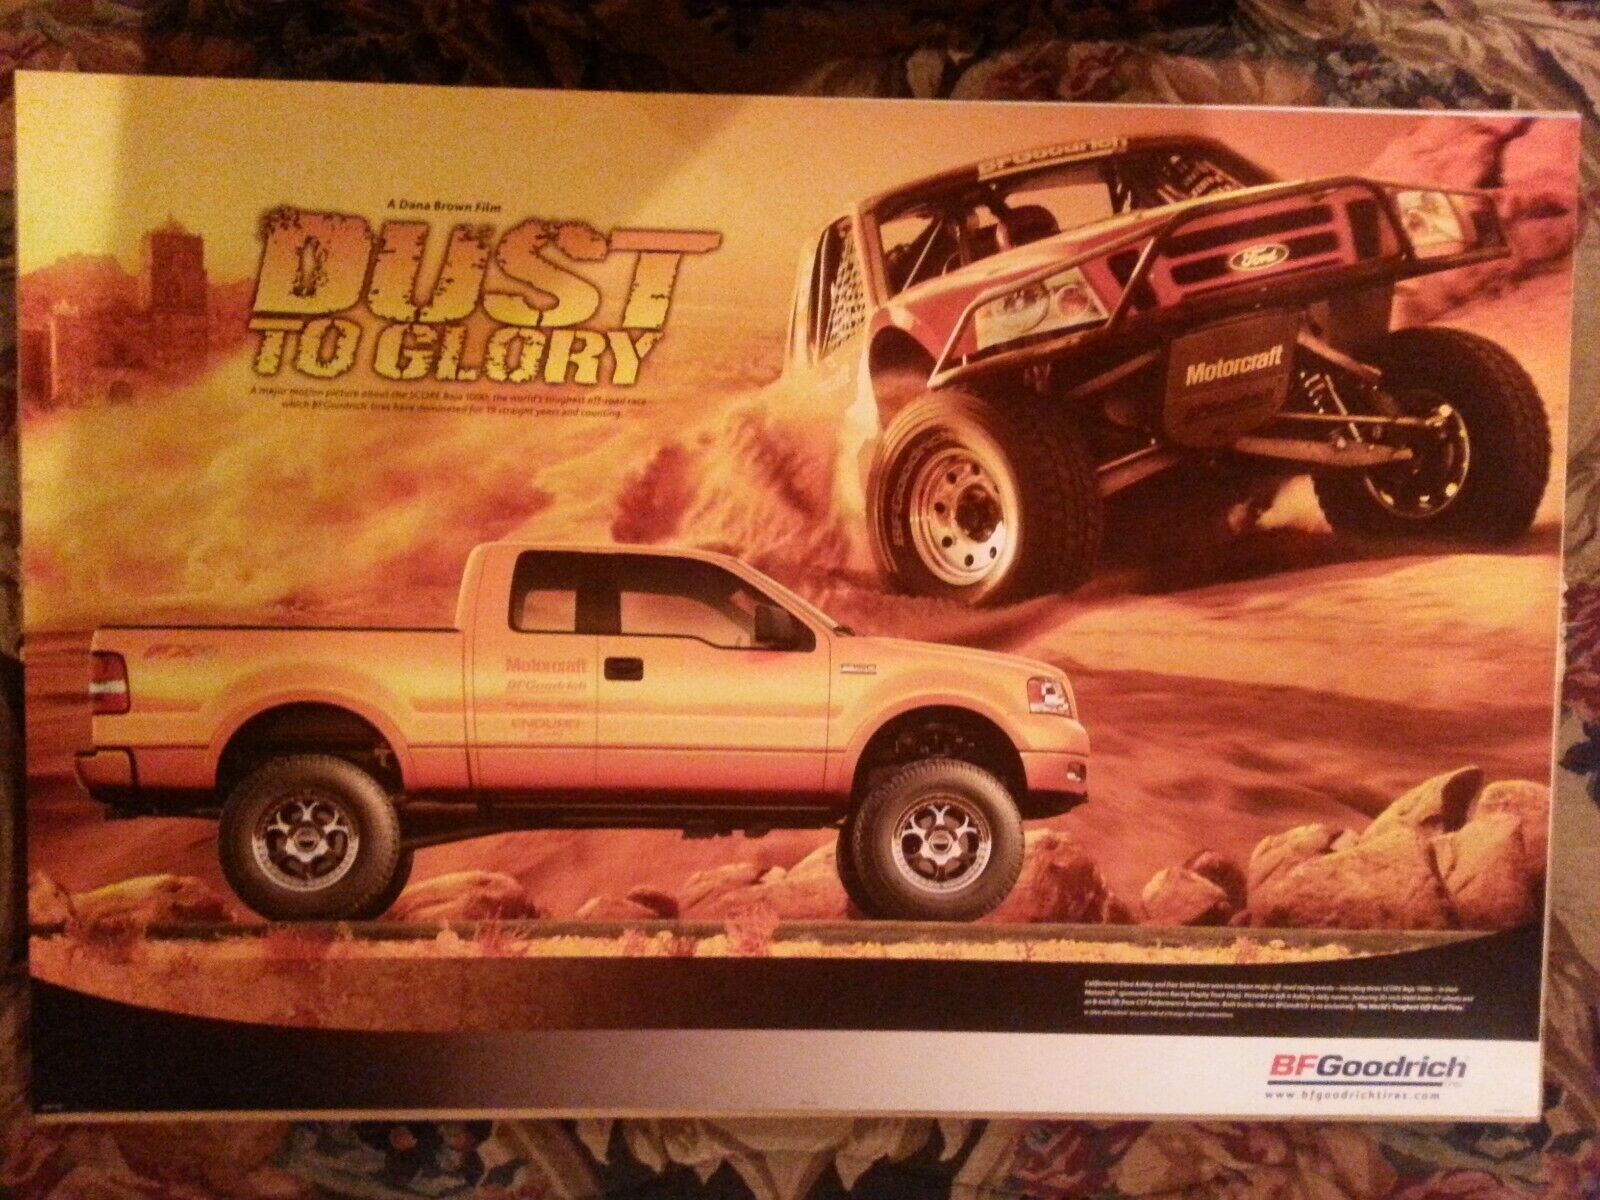 BF GOODRICH ORIGINAL SIGN  DUST TO GORY POSTER,FEATURING FORD BAJA OFF ROAD RACE LITHO PRINT